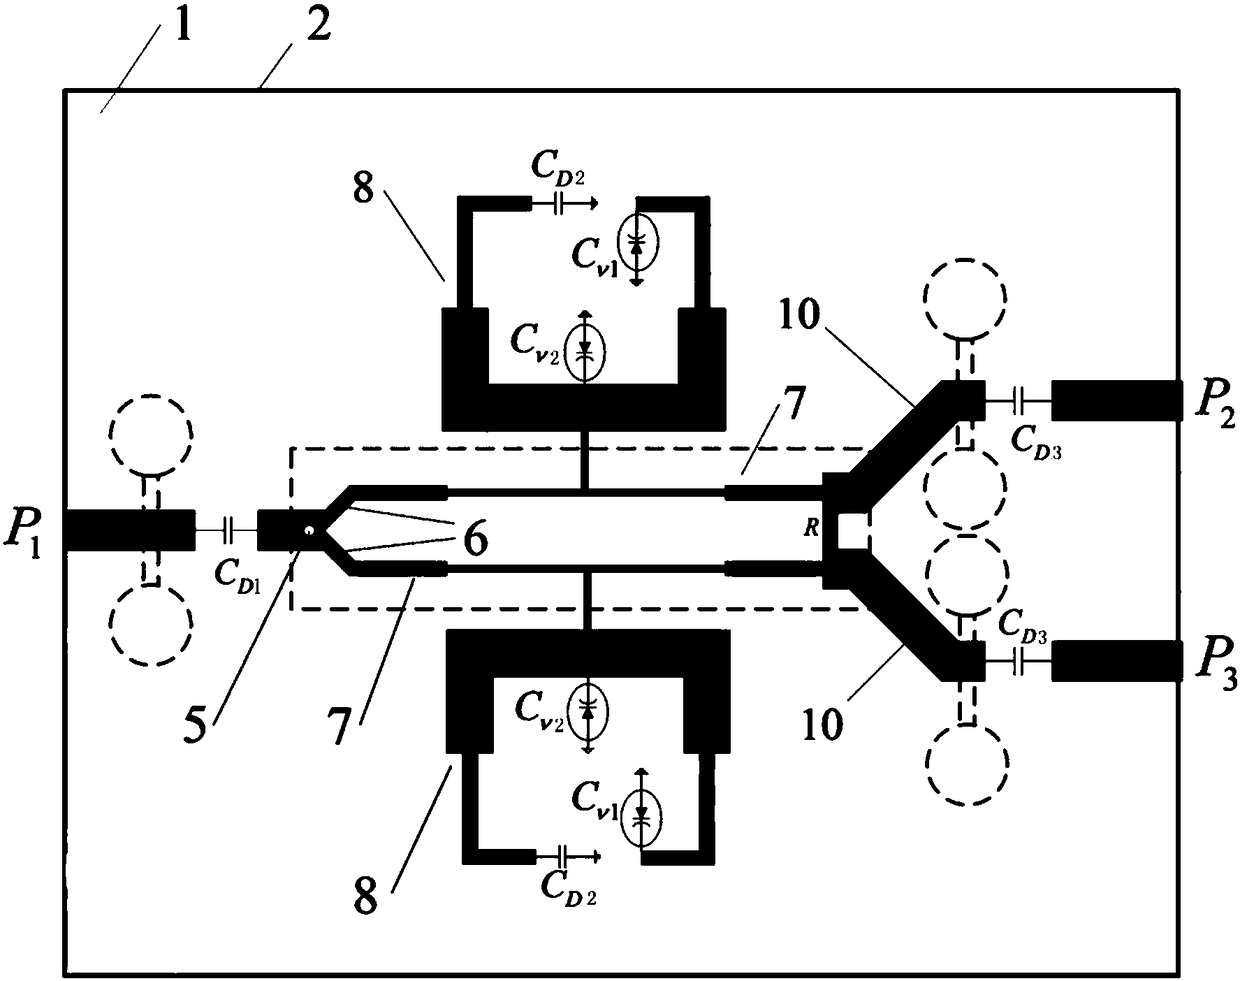 Wide-stop-band reconfigurable filter type power divider based on SIR and DGS structures